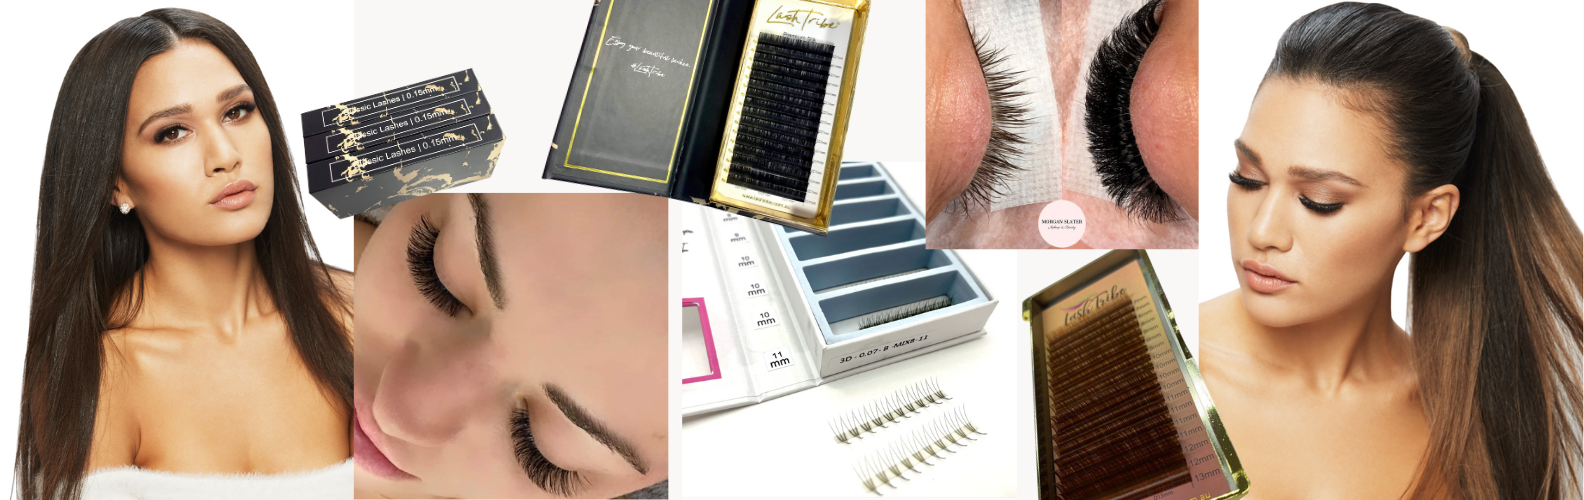 Collage of a woman with long eyelashes, false eyelash products, and close-up views of eyelash extensions.